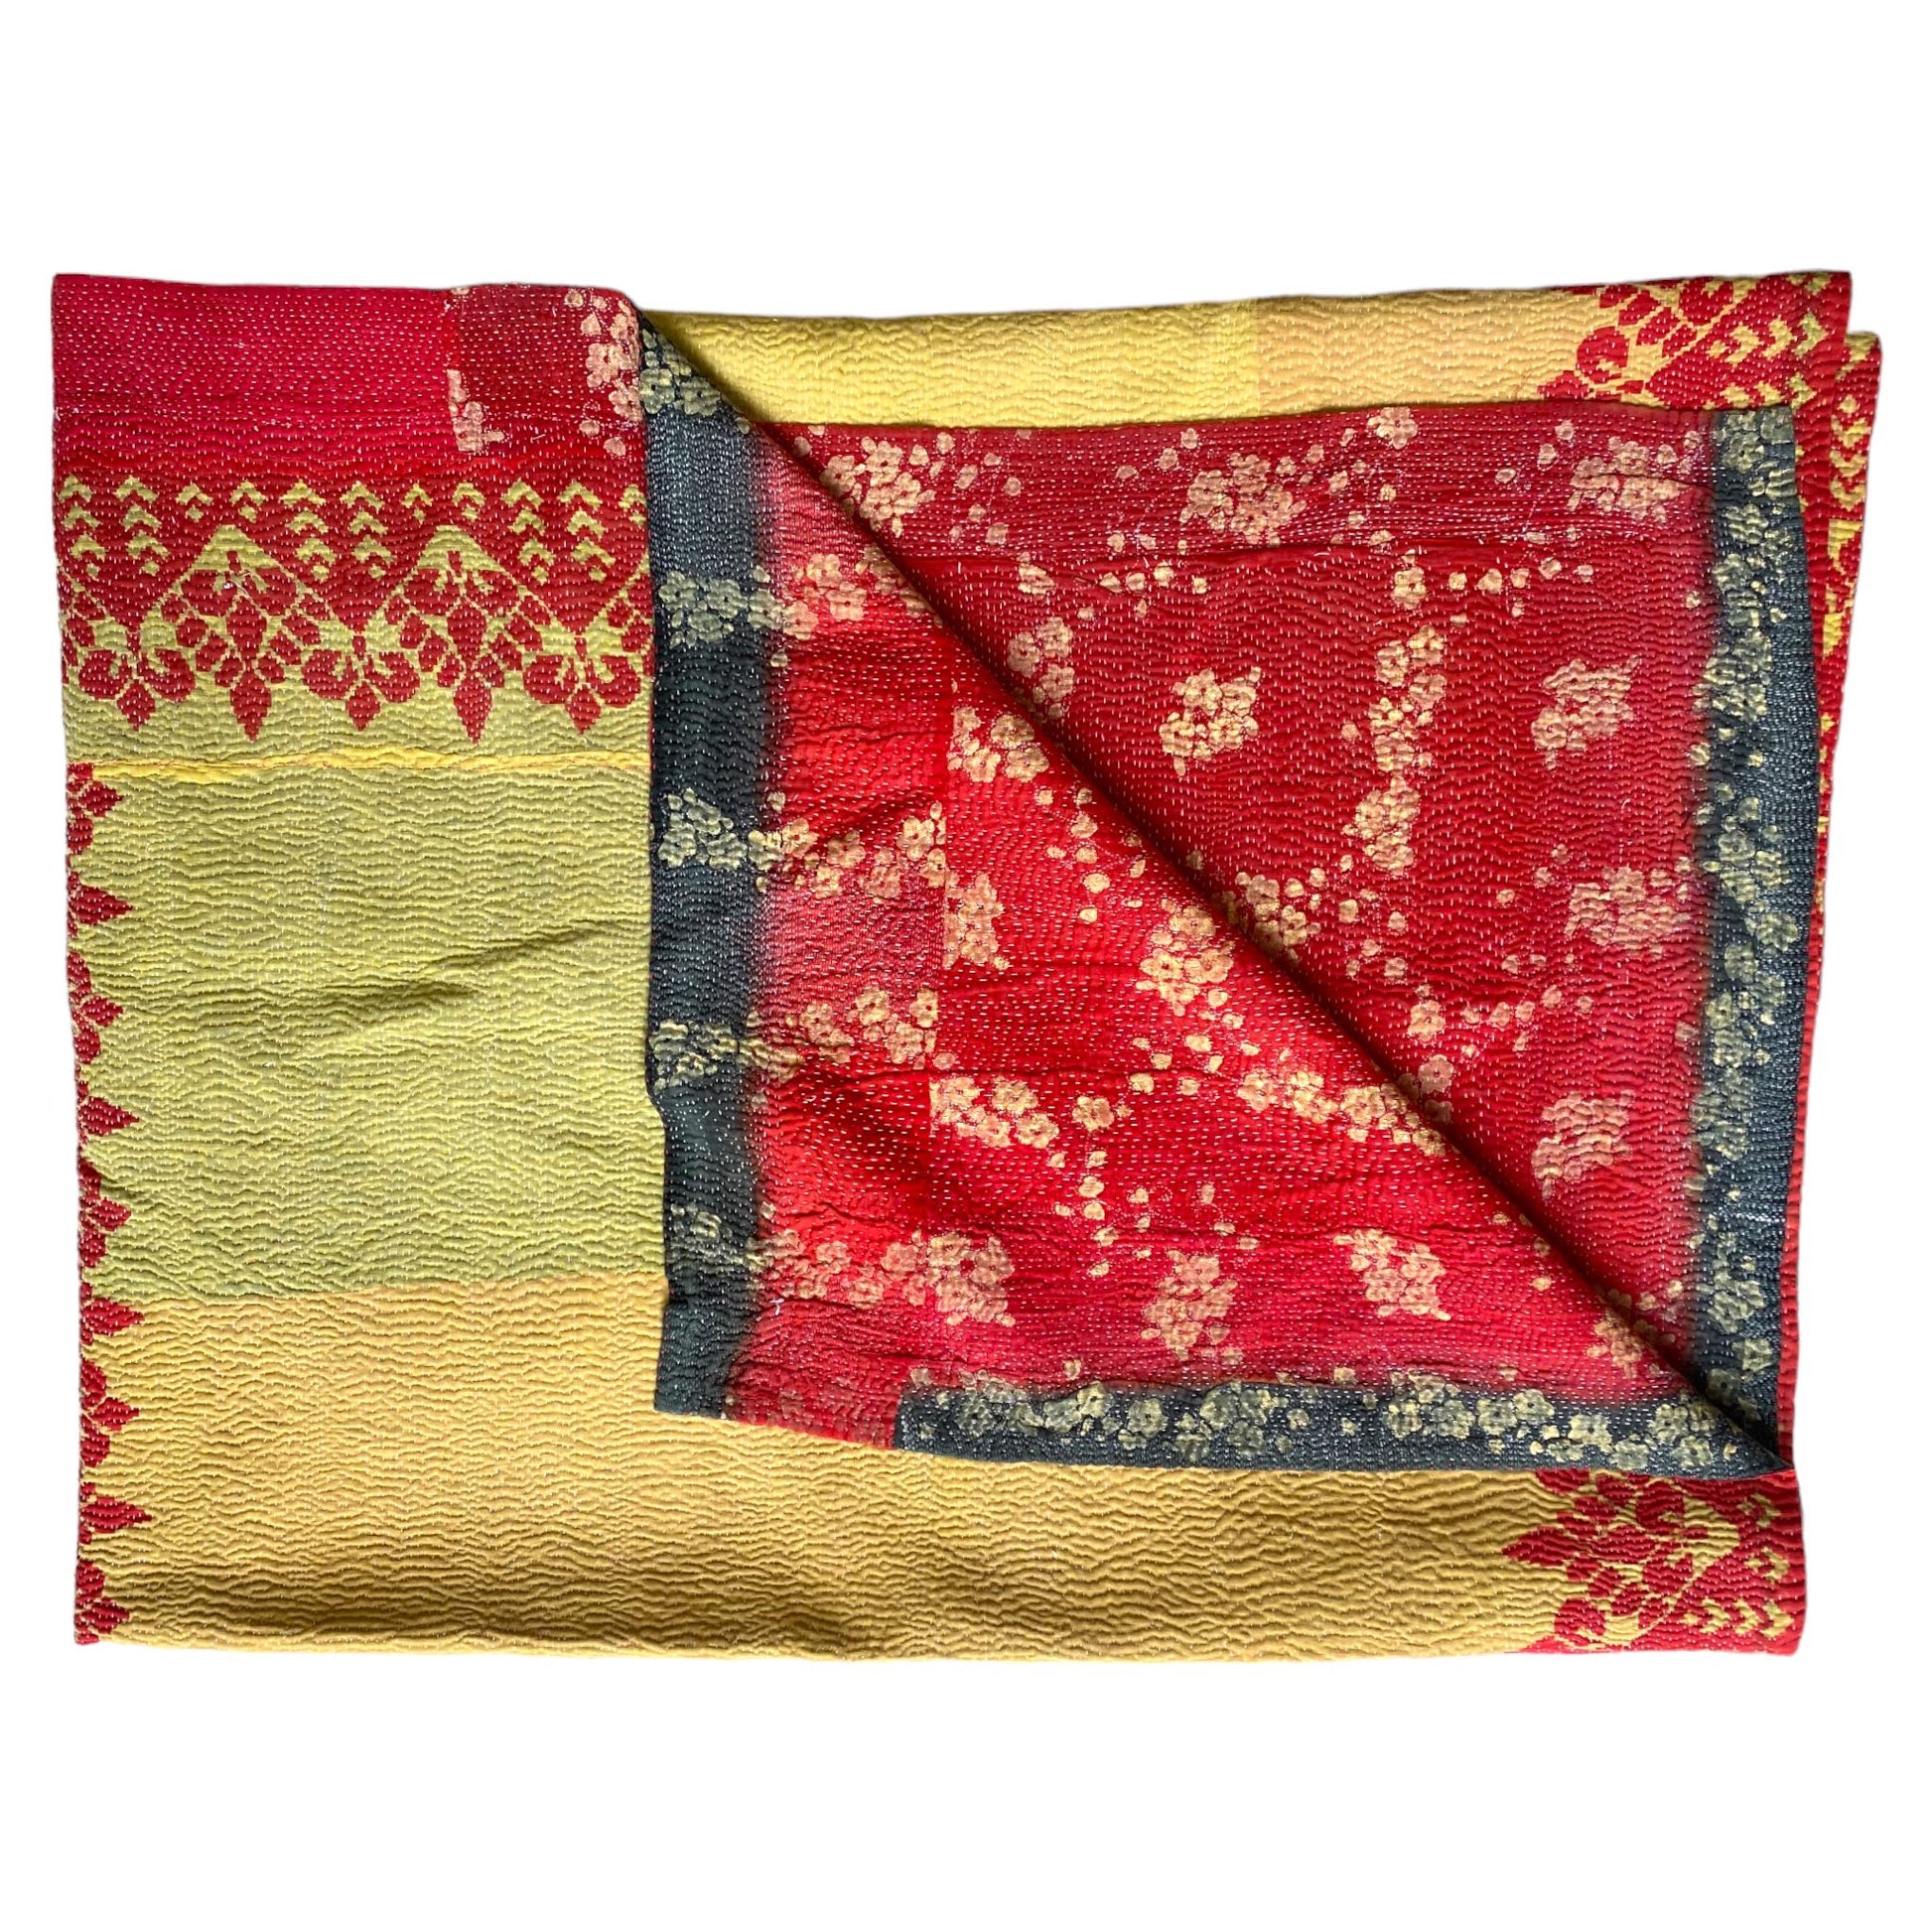 Yellow and red kantha quilt